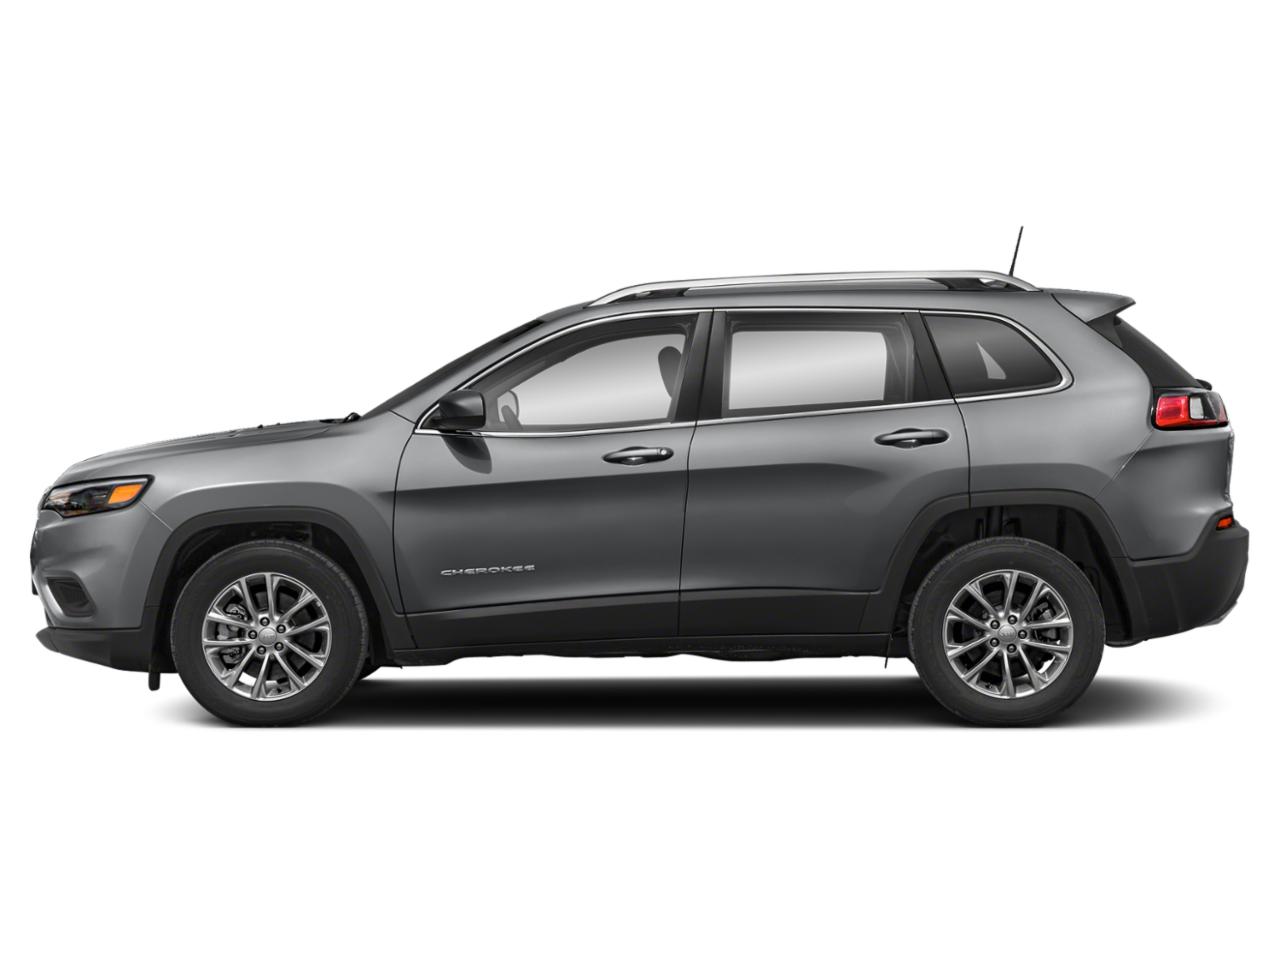 Used 2019 Jeep Cherokee Latitude Plus with VIN 1C4PJMLB6KD201090 for sale in Whitehall, WV